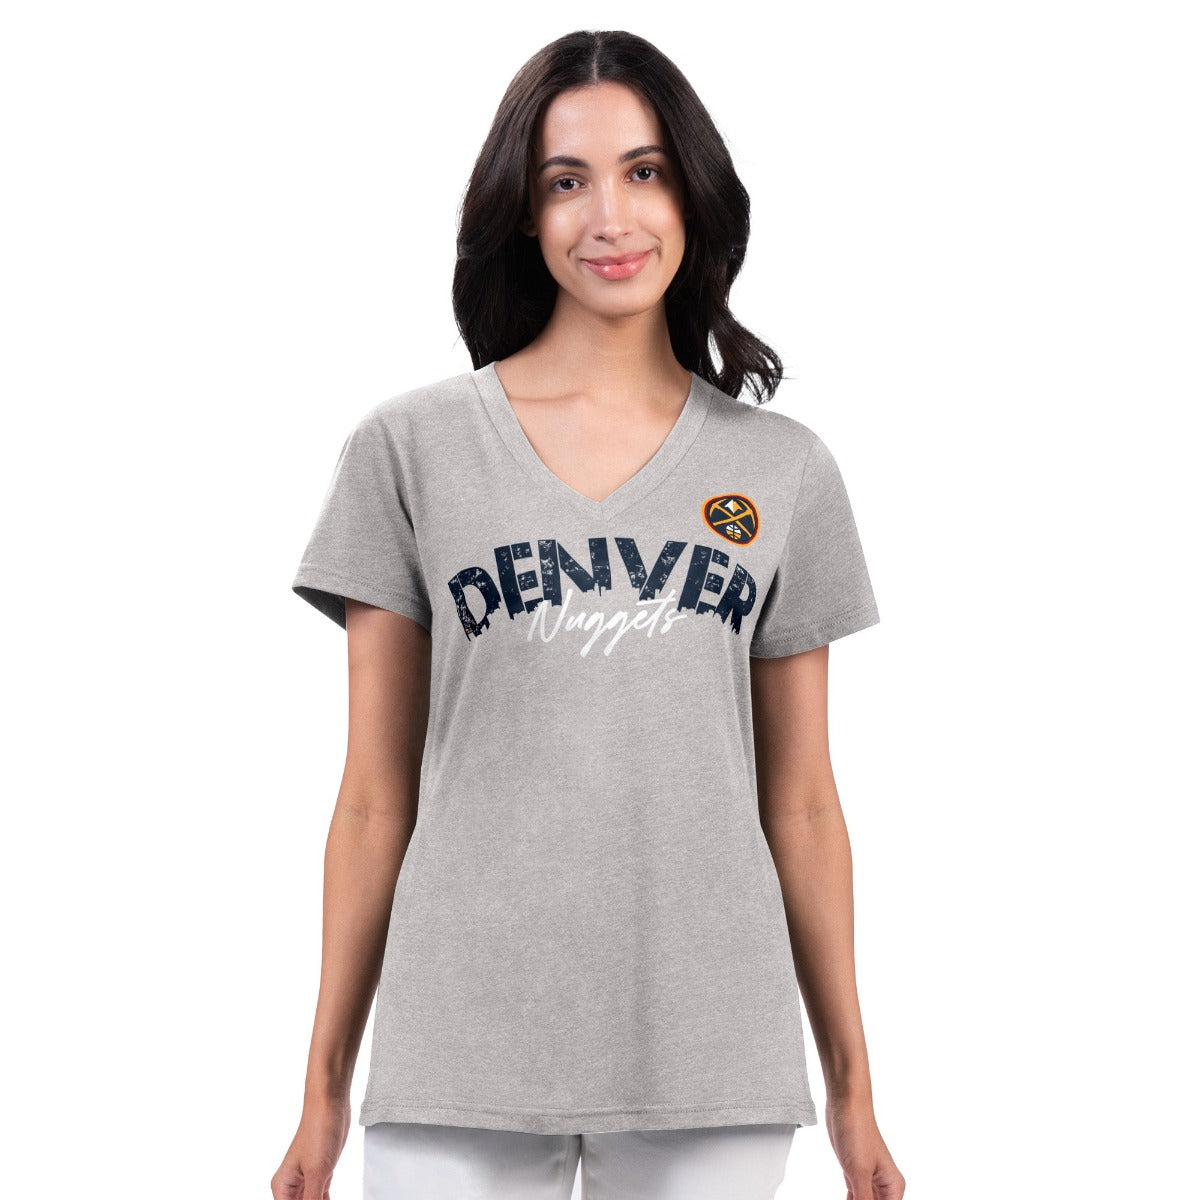 Light grey tee, Denver in navy, Nuggets in white Script, Nuggets logo on left chest above the word Denver